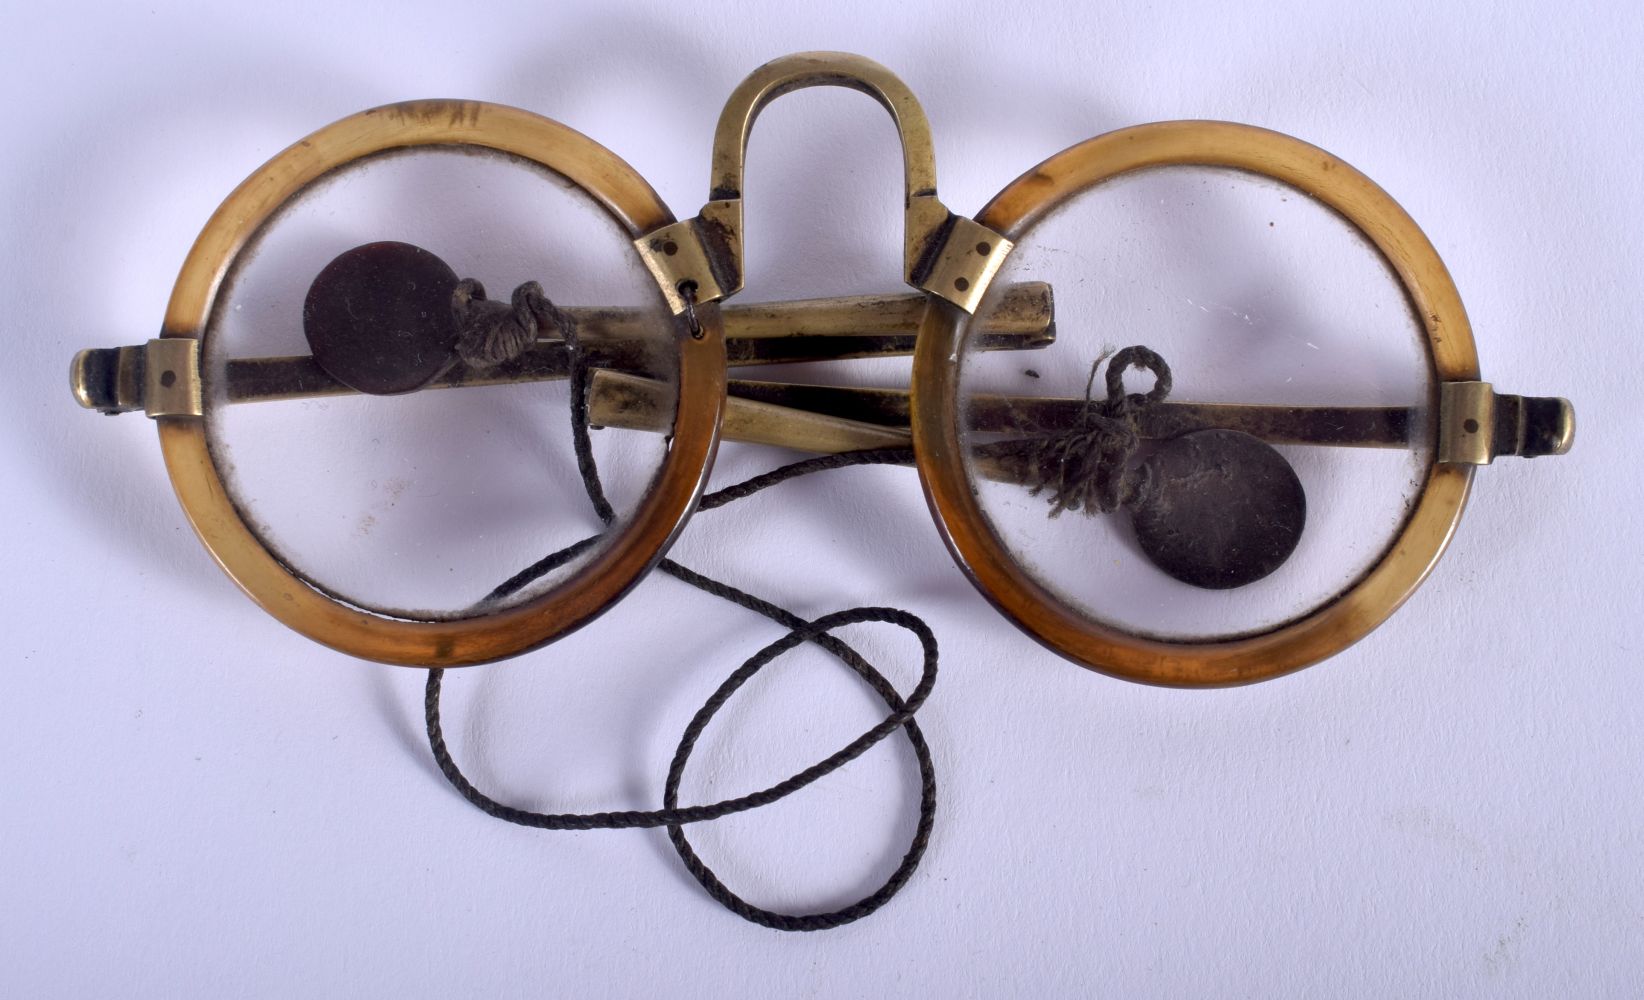 A RARE PAIR OF EARLY 20TH CENTURY CHINESE CARVED RHINOCEROS HORN SPECTACLES with folding arms. 14 cm